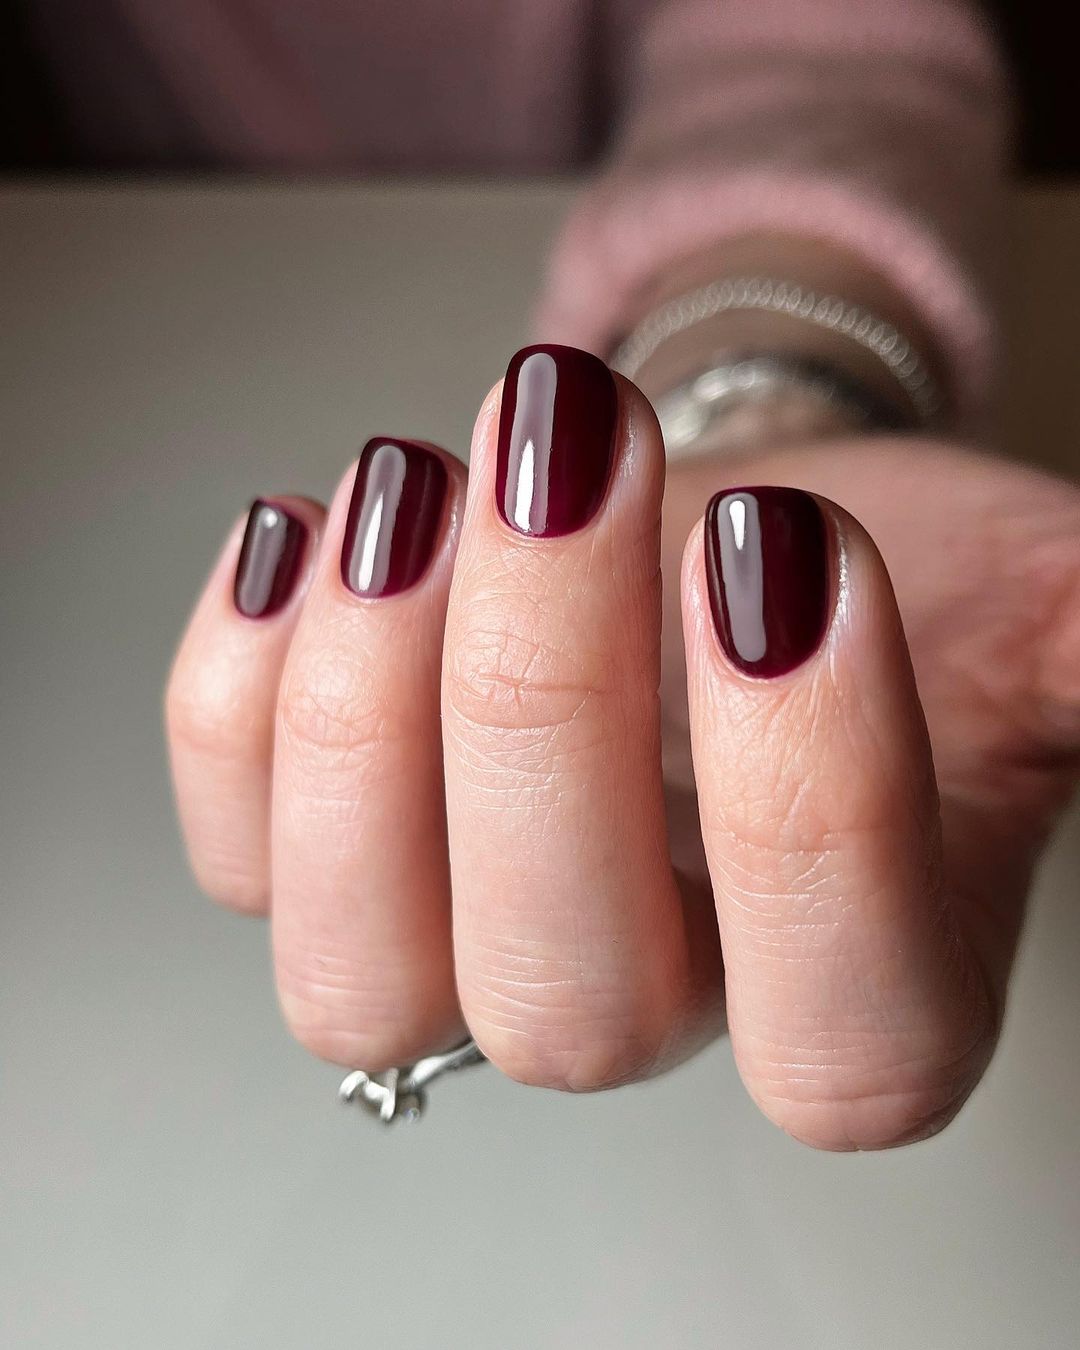 These 35 Short Nails Ideas and Designs Are The Best